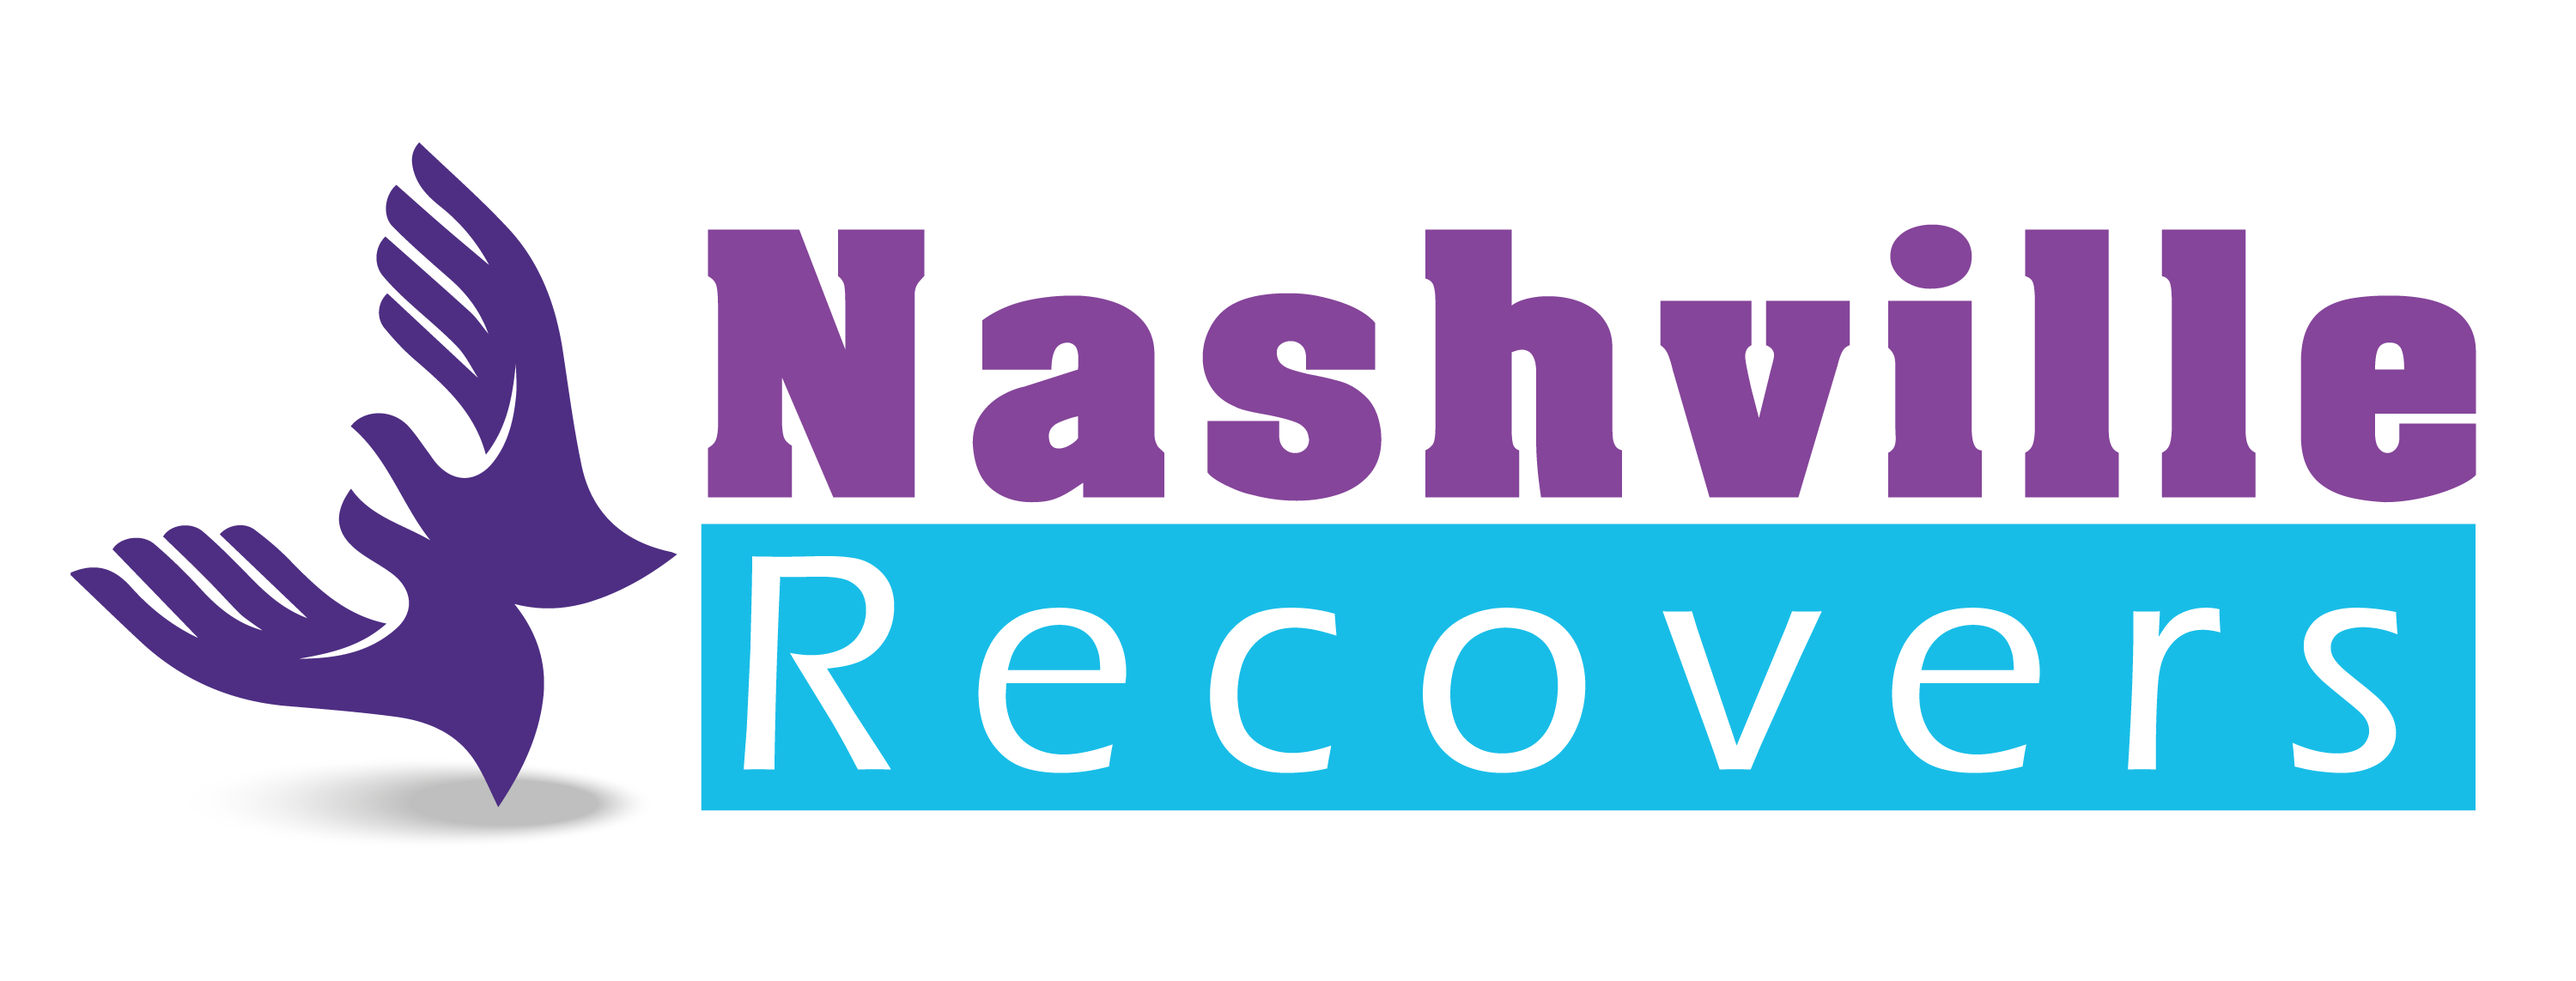 Nashville Recovers